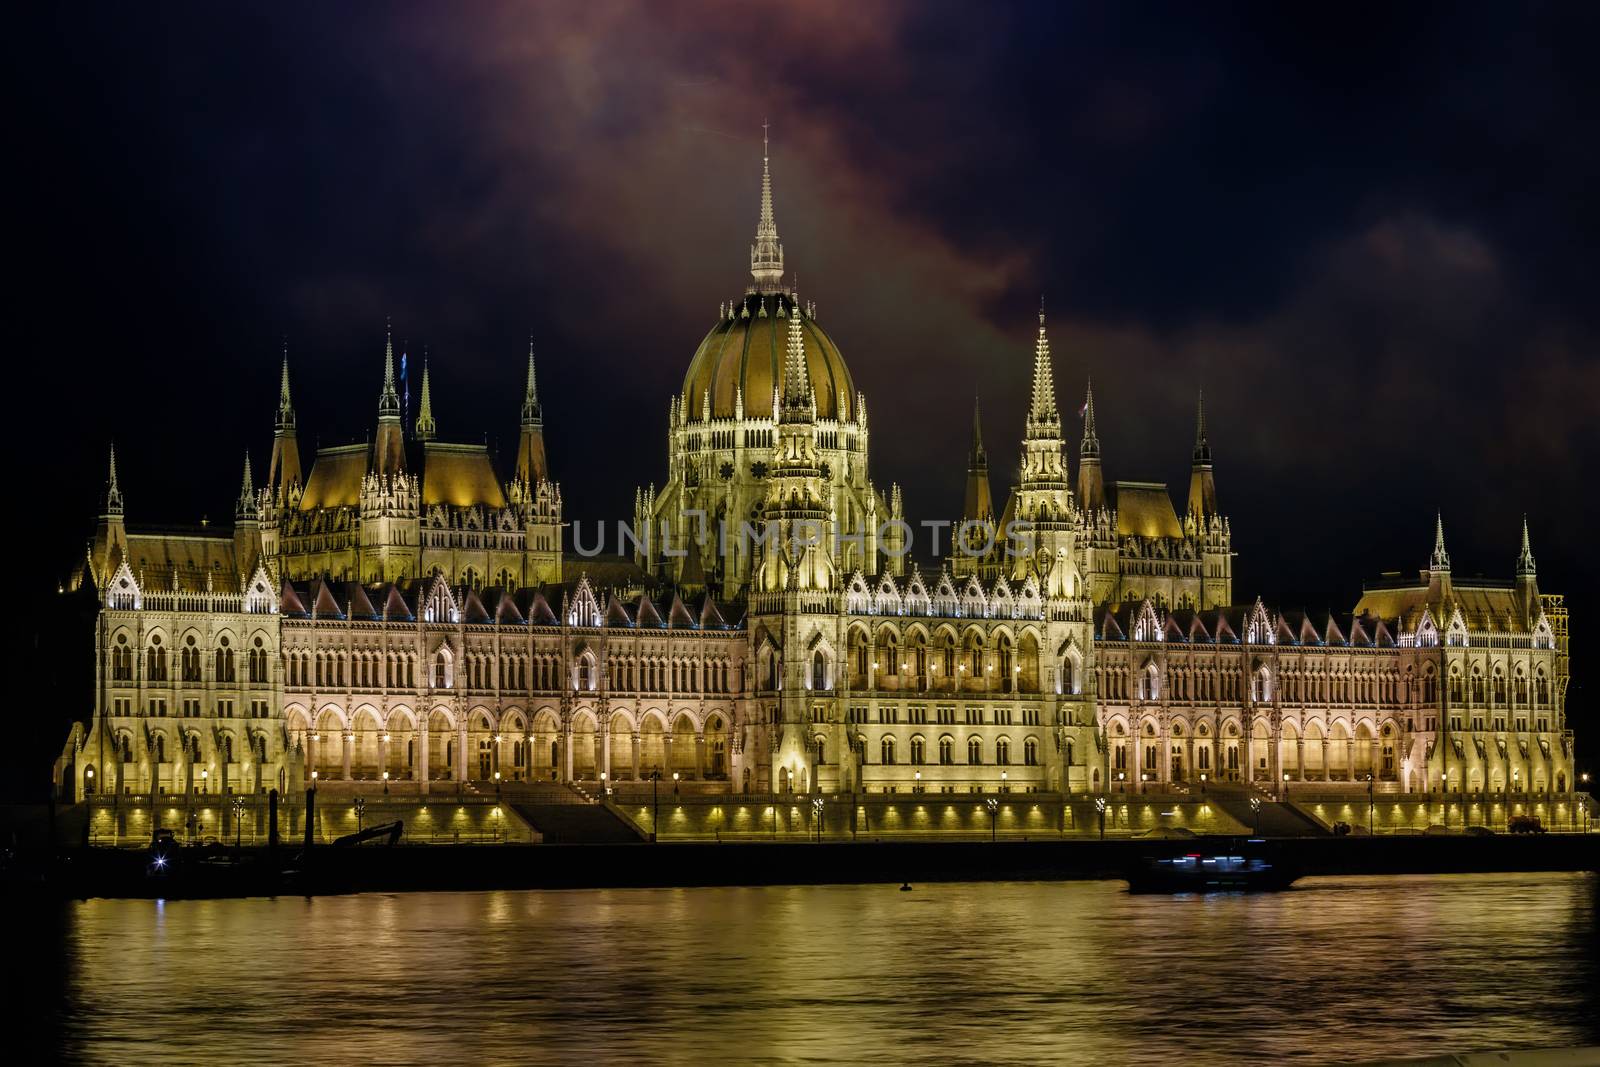 The night scene of the Budapest and the Danube river